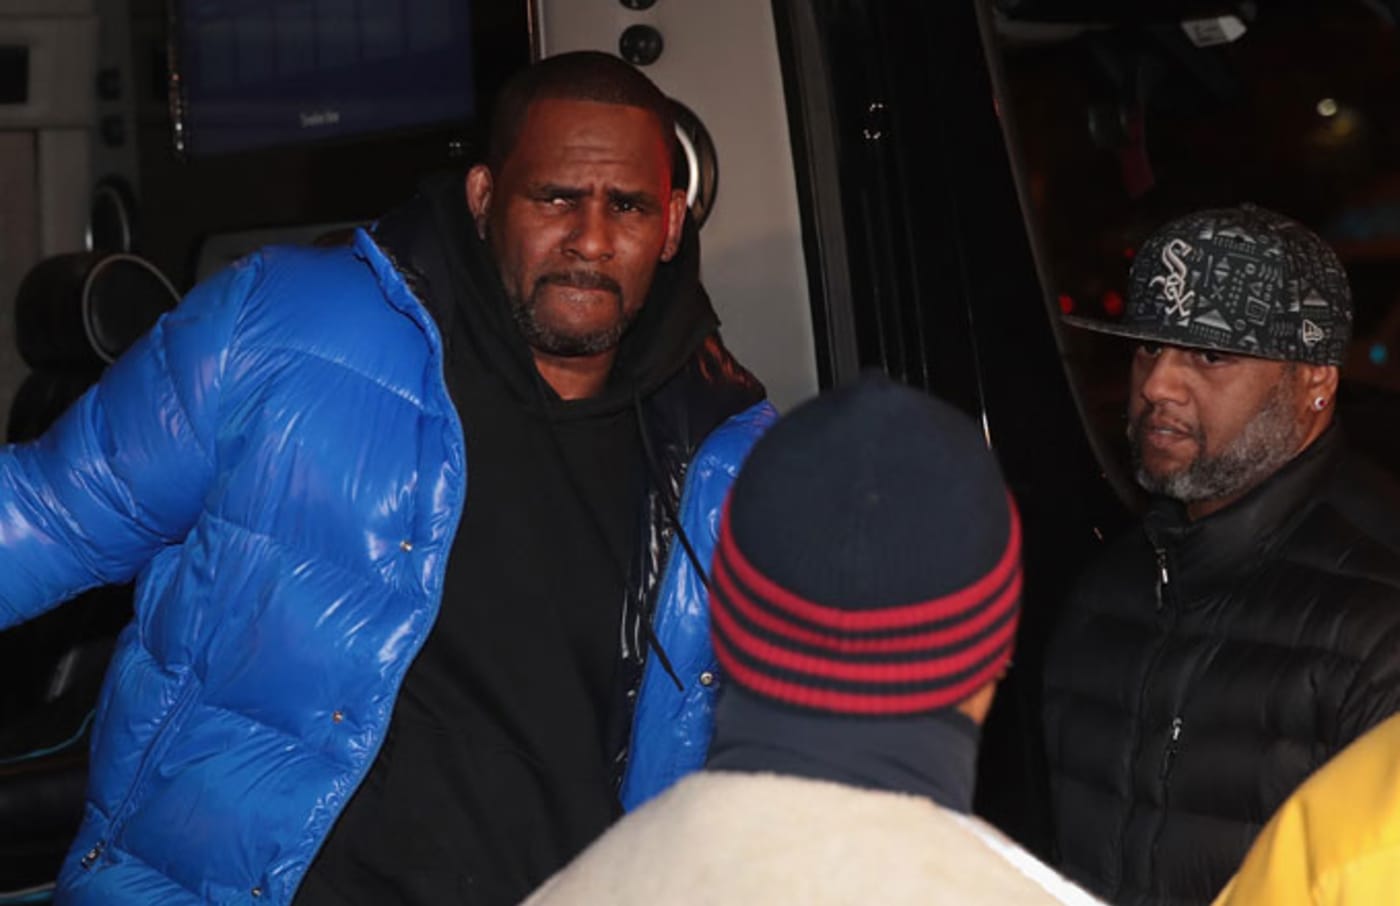 R. Kelly turns himself into Chicago police on Friday, February 22.